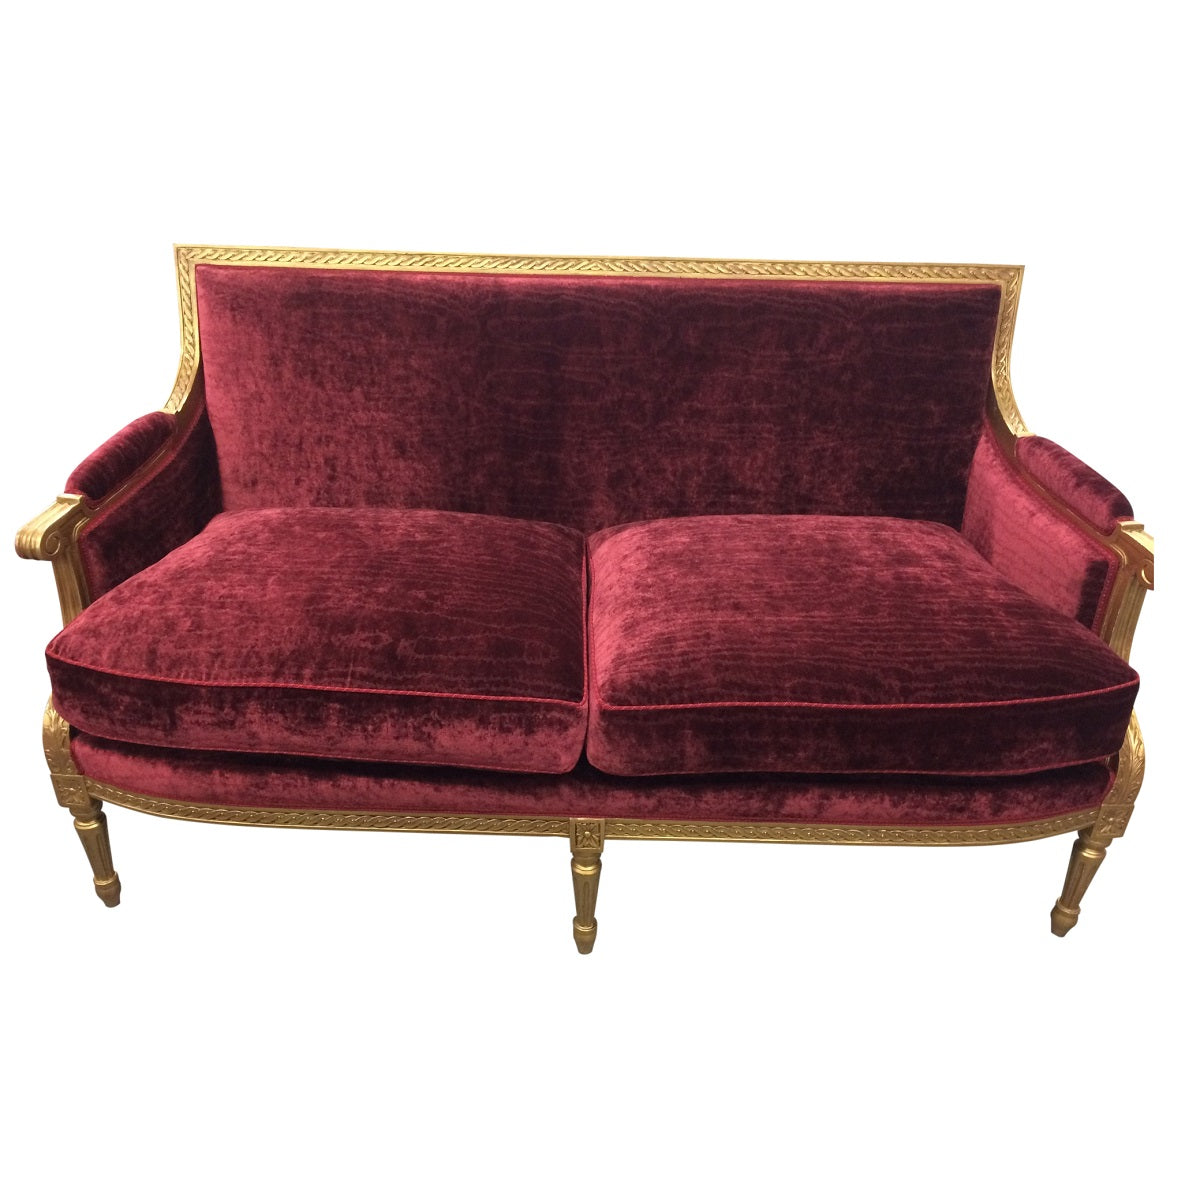 Louis XVI Style Classic Sofa - painted gold